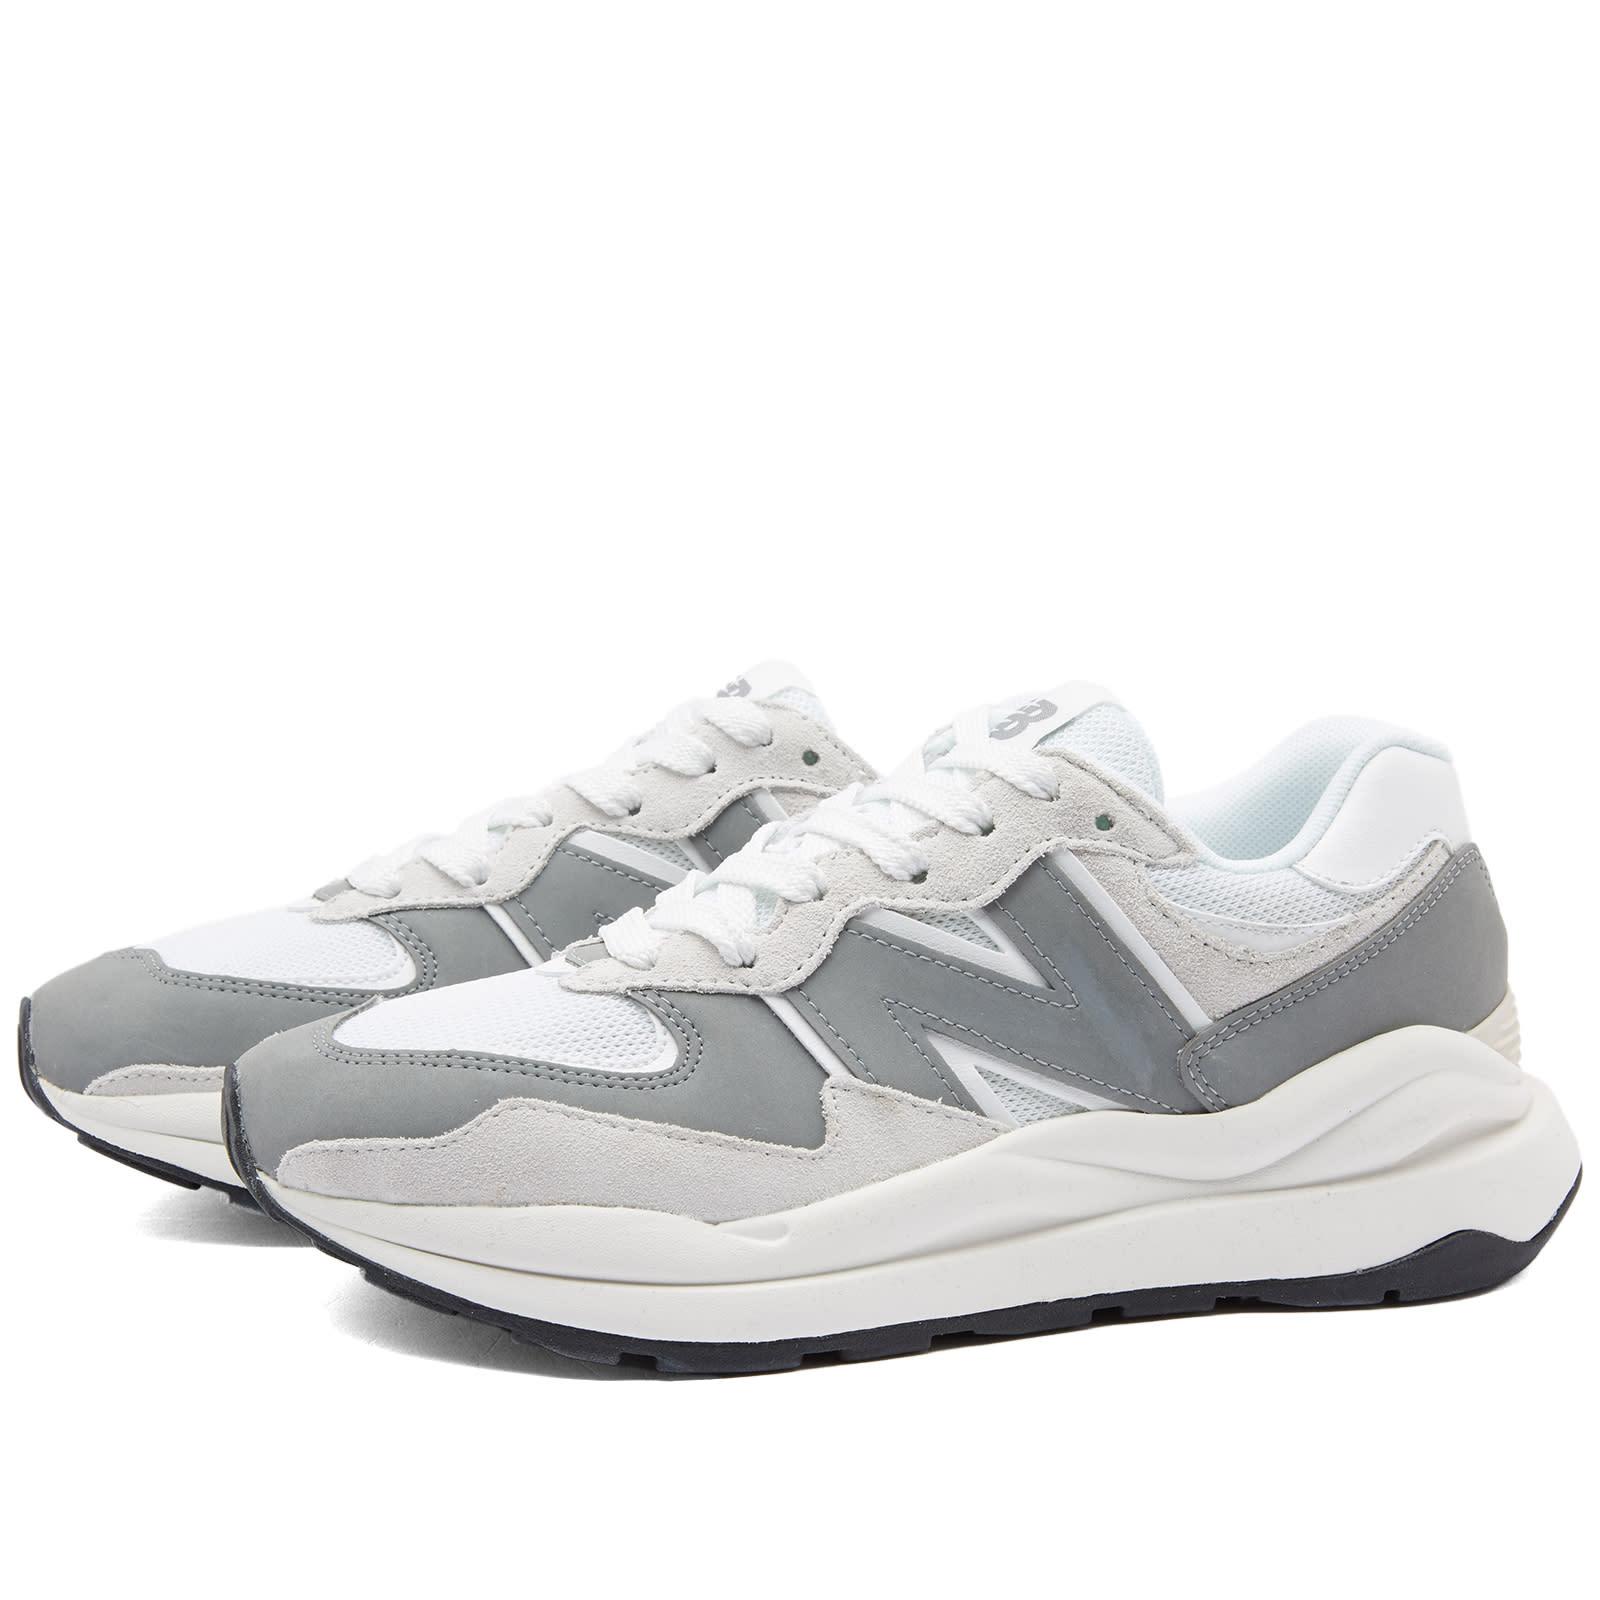 New Balance W5740svd Sneakers in White | Lyst